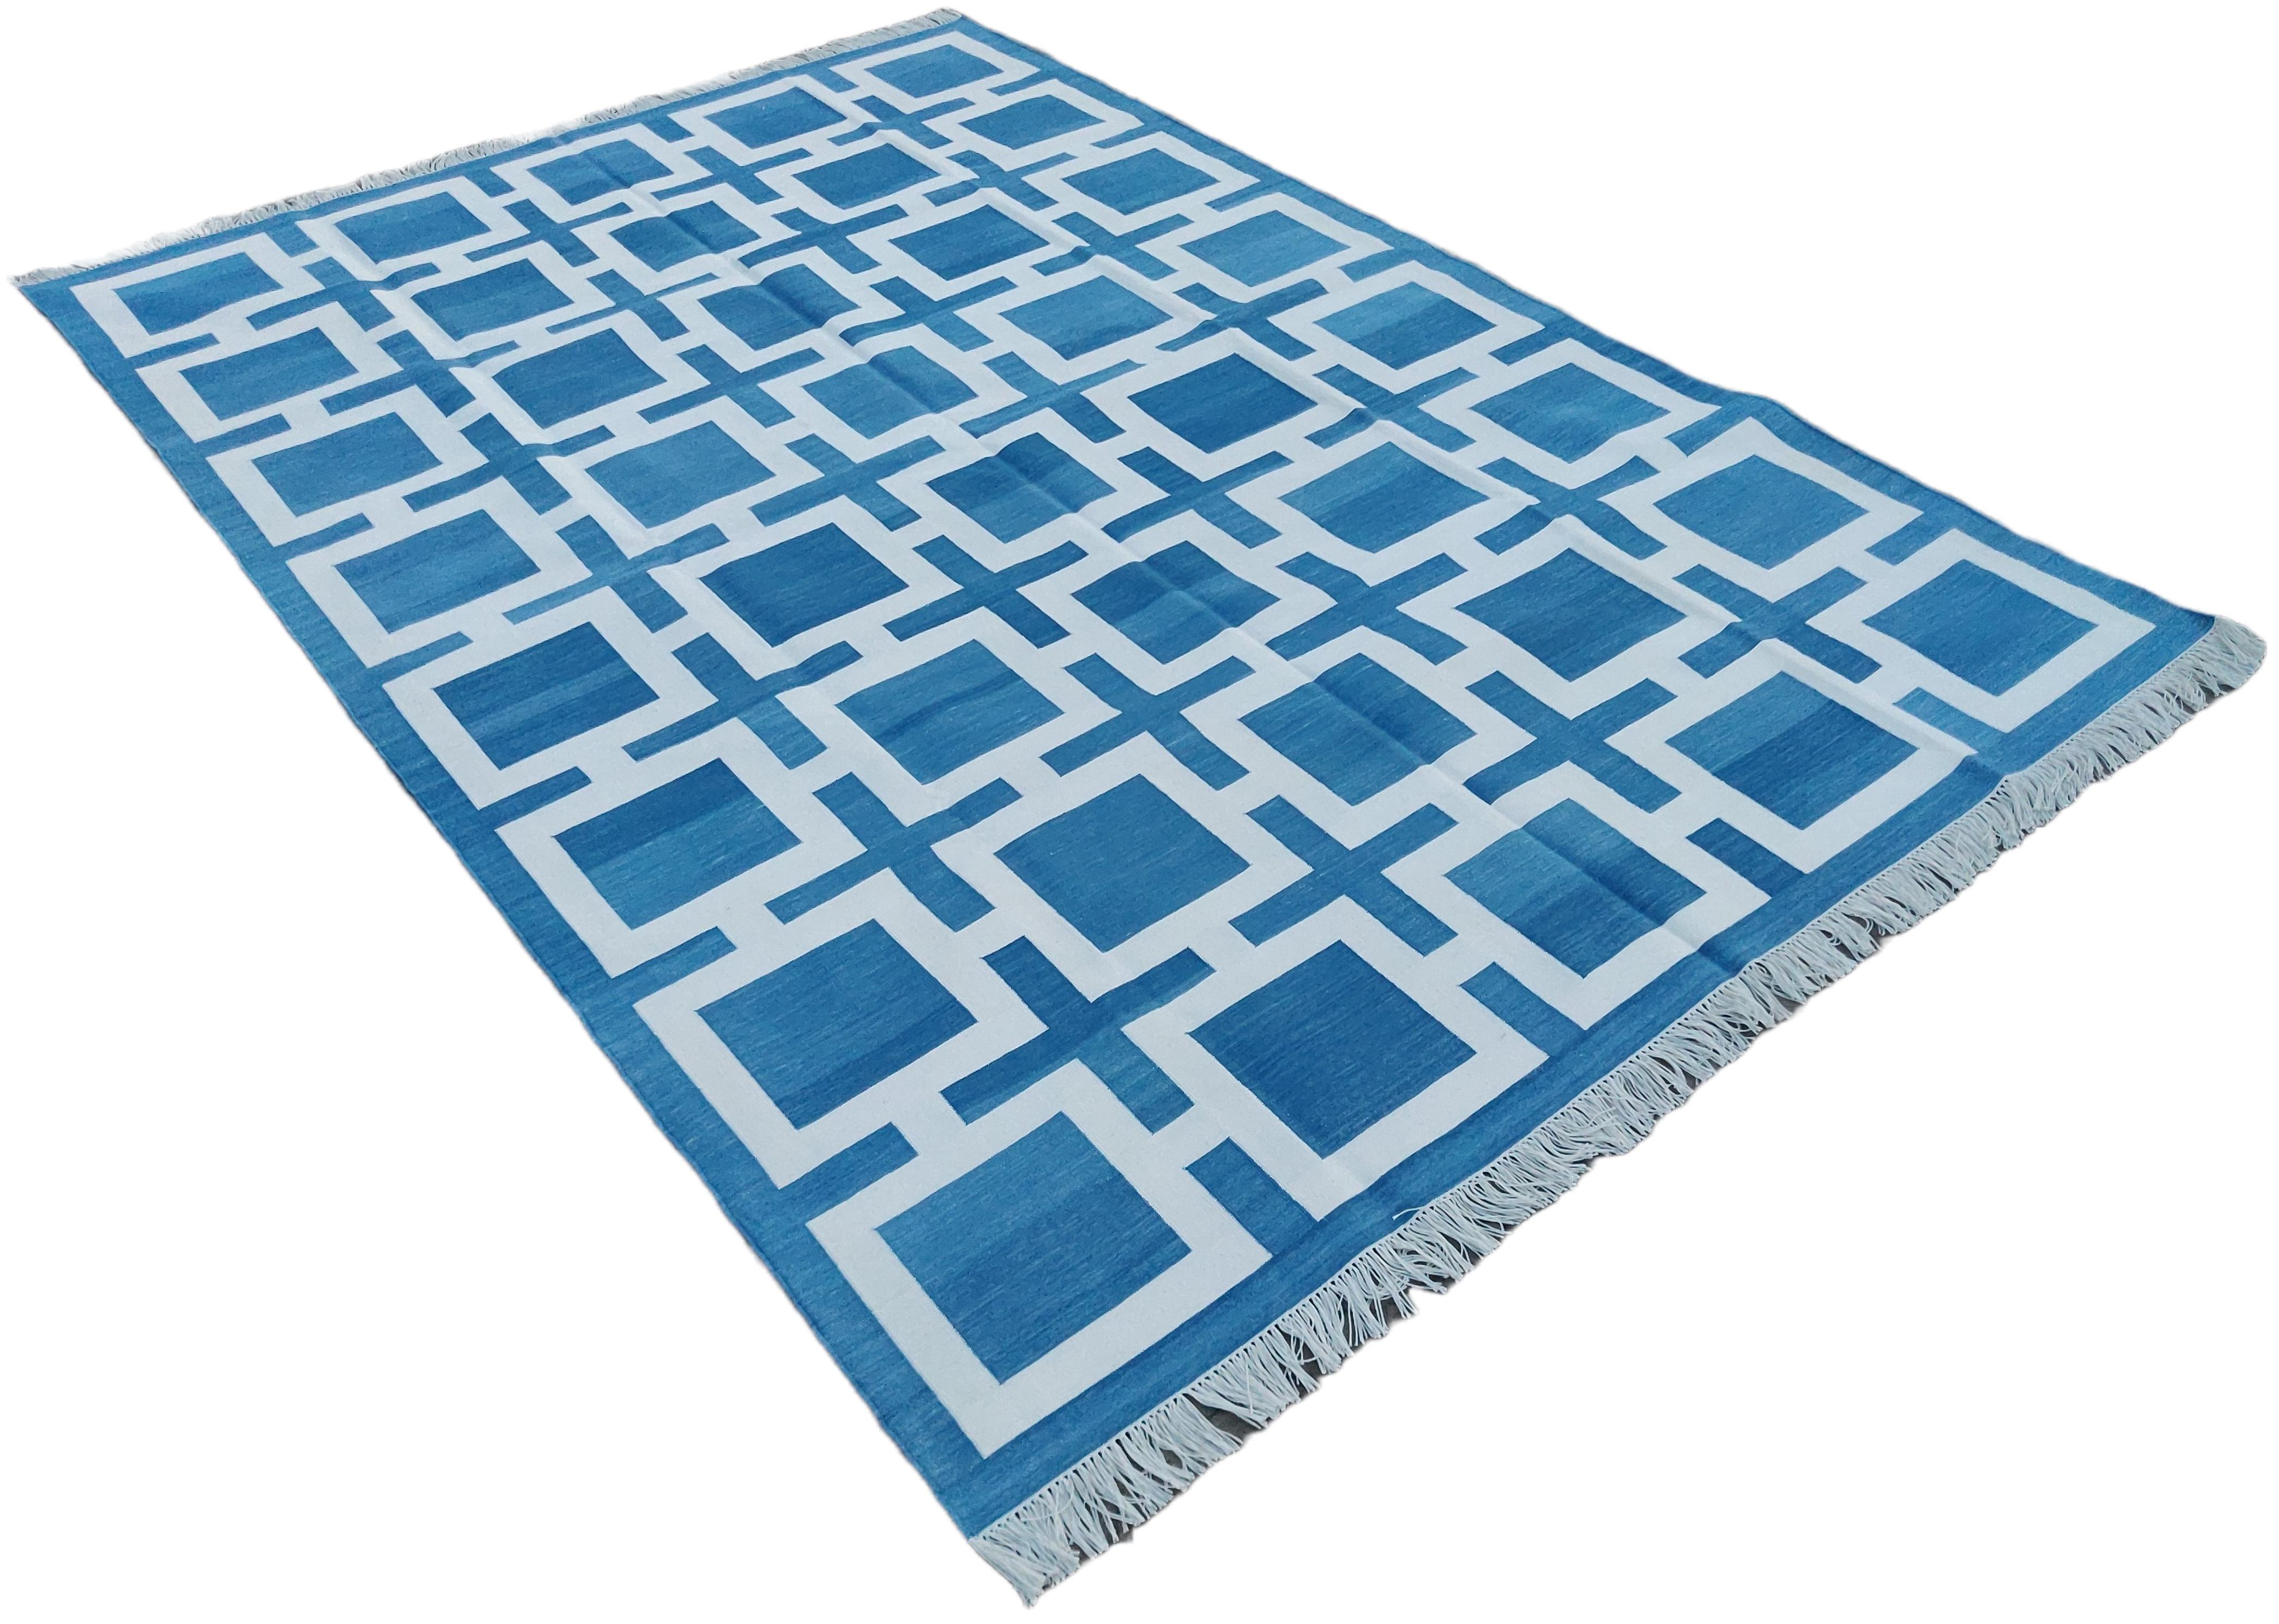 Cotton Vegetable Dyed Sky Blue And White Geometric Indian Rug-6'x9' 
These special flat-weave dhurries are hand-woven with 15 ply 100% cotton yarn. Due to the special manufacturing techniques used to create our rugs, the size and color of each piece